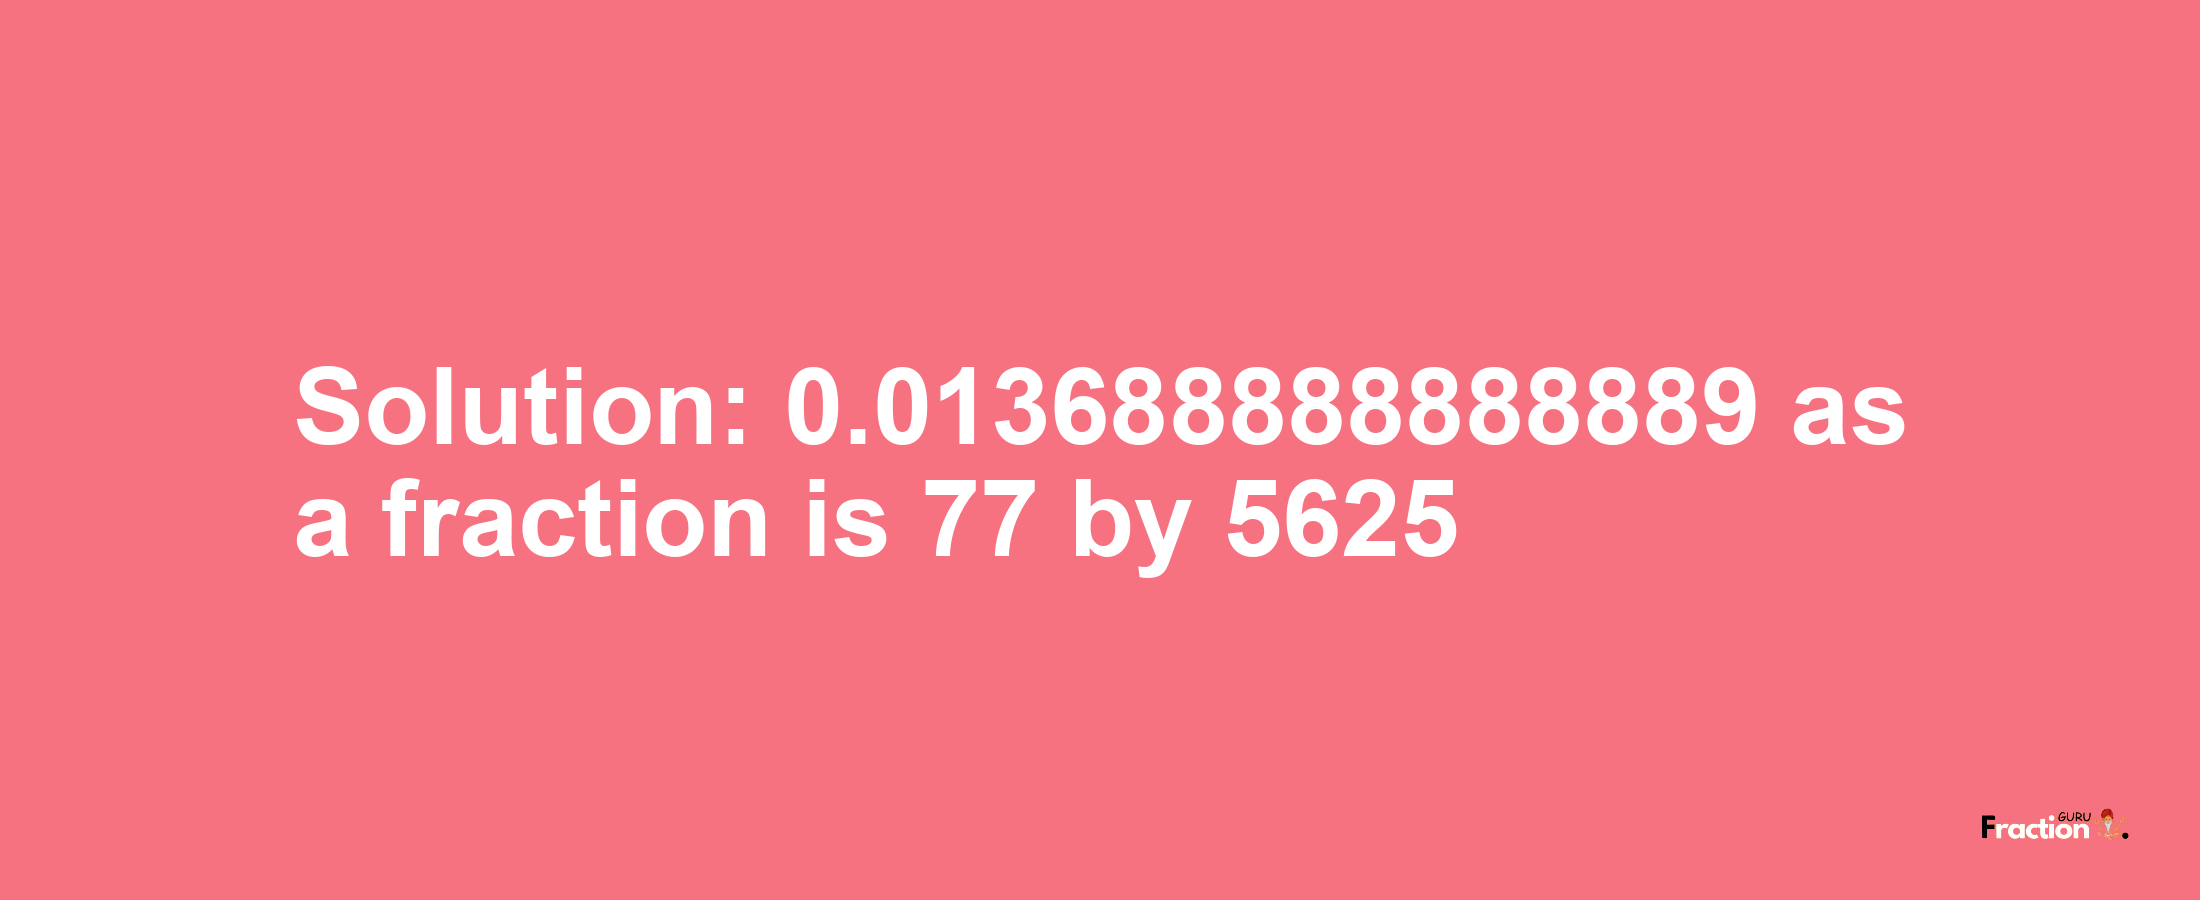 Solution:0.013688888888889 as a fraction is 77/5625